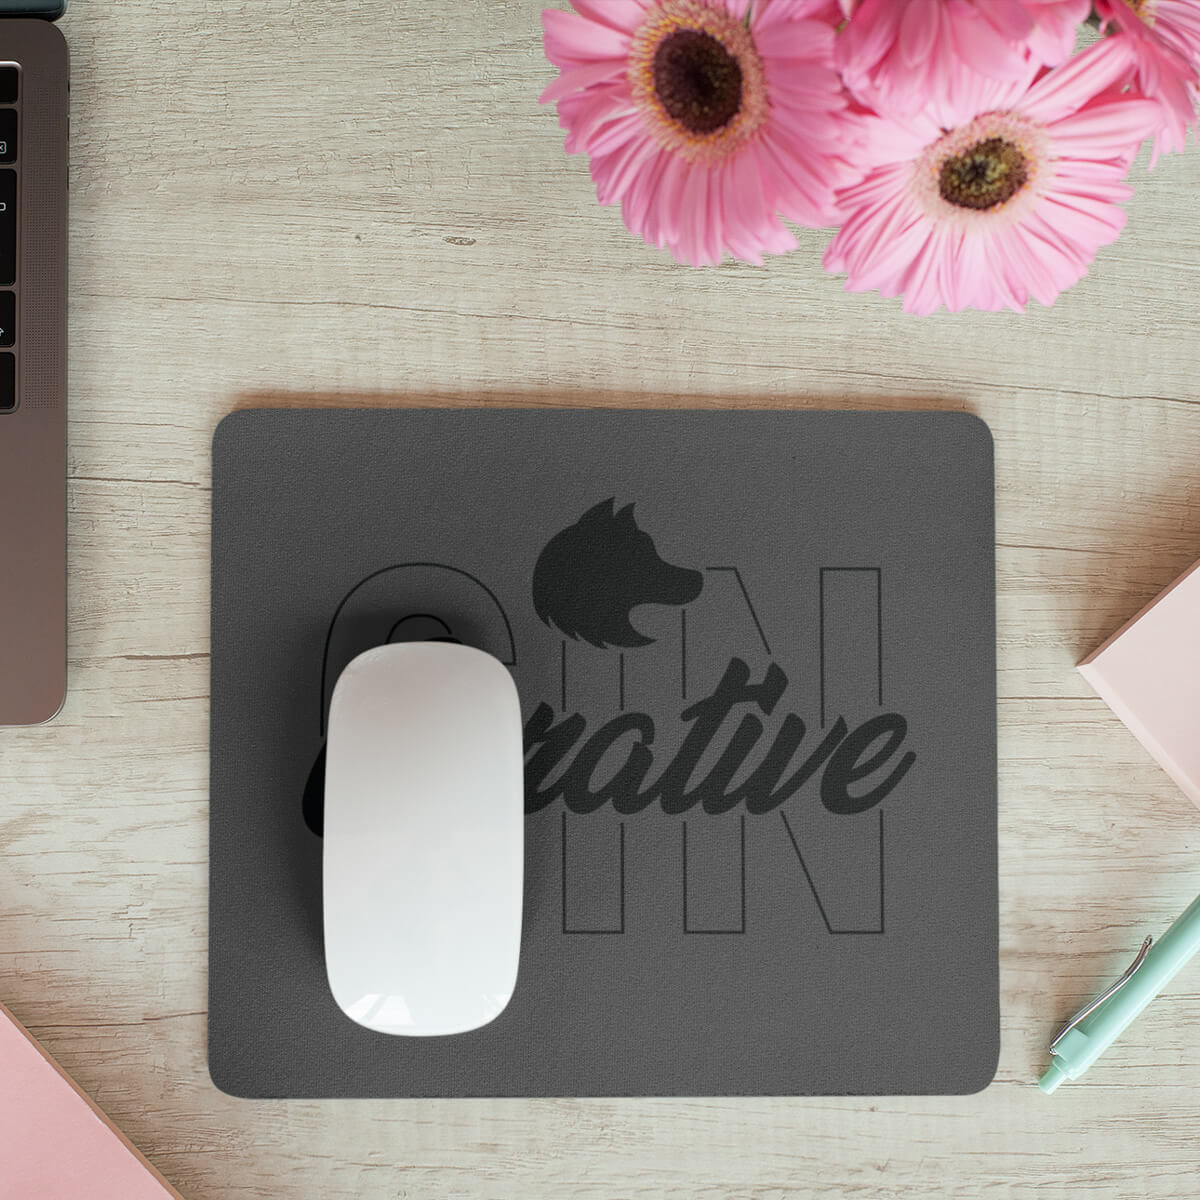 Desktop with flowers and logo imprinted mouse pad promotional technology by curative printing